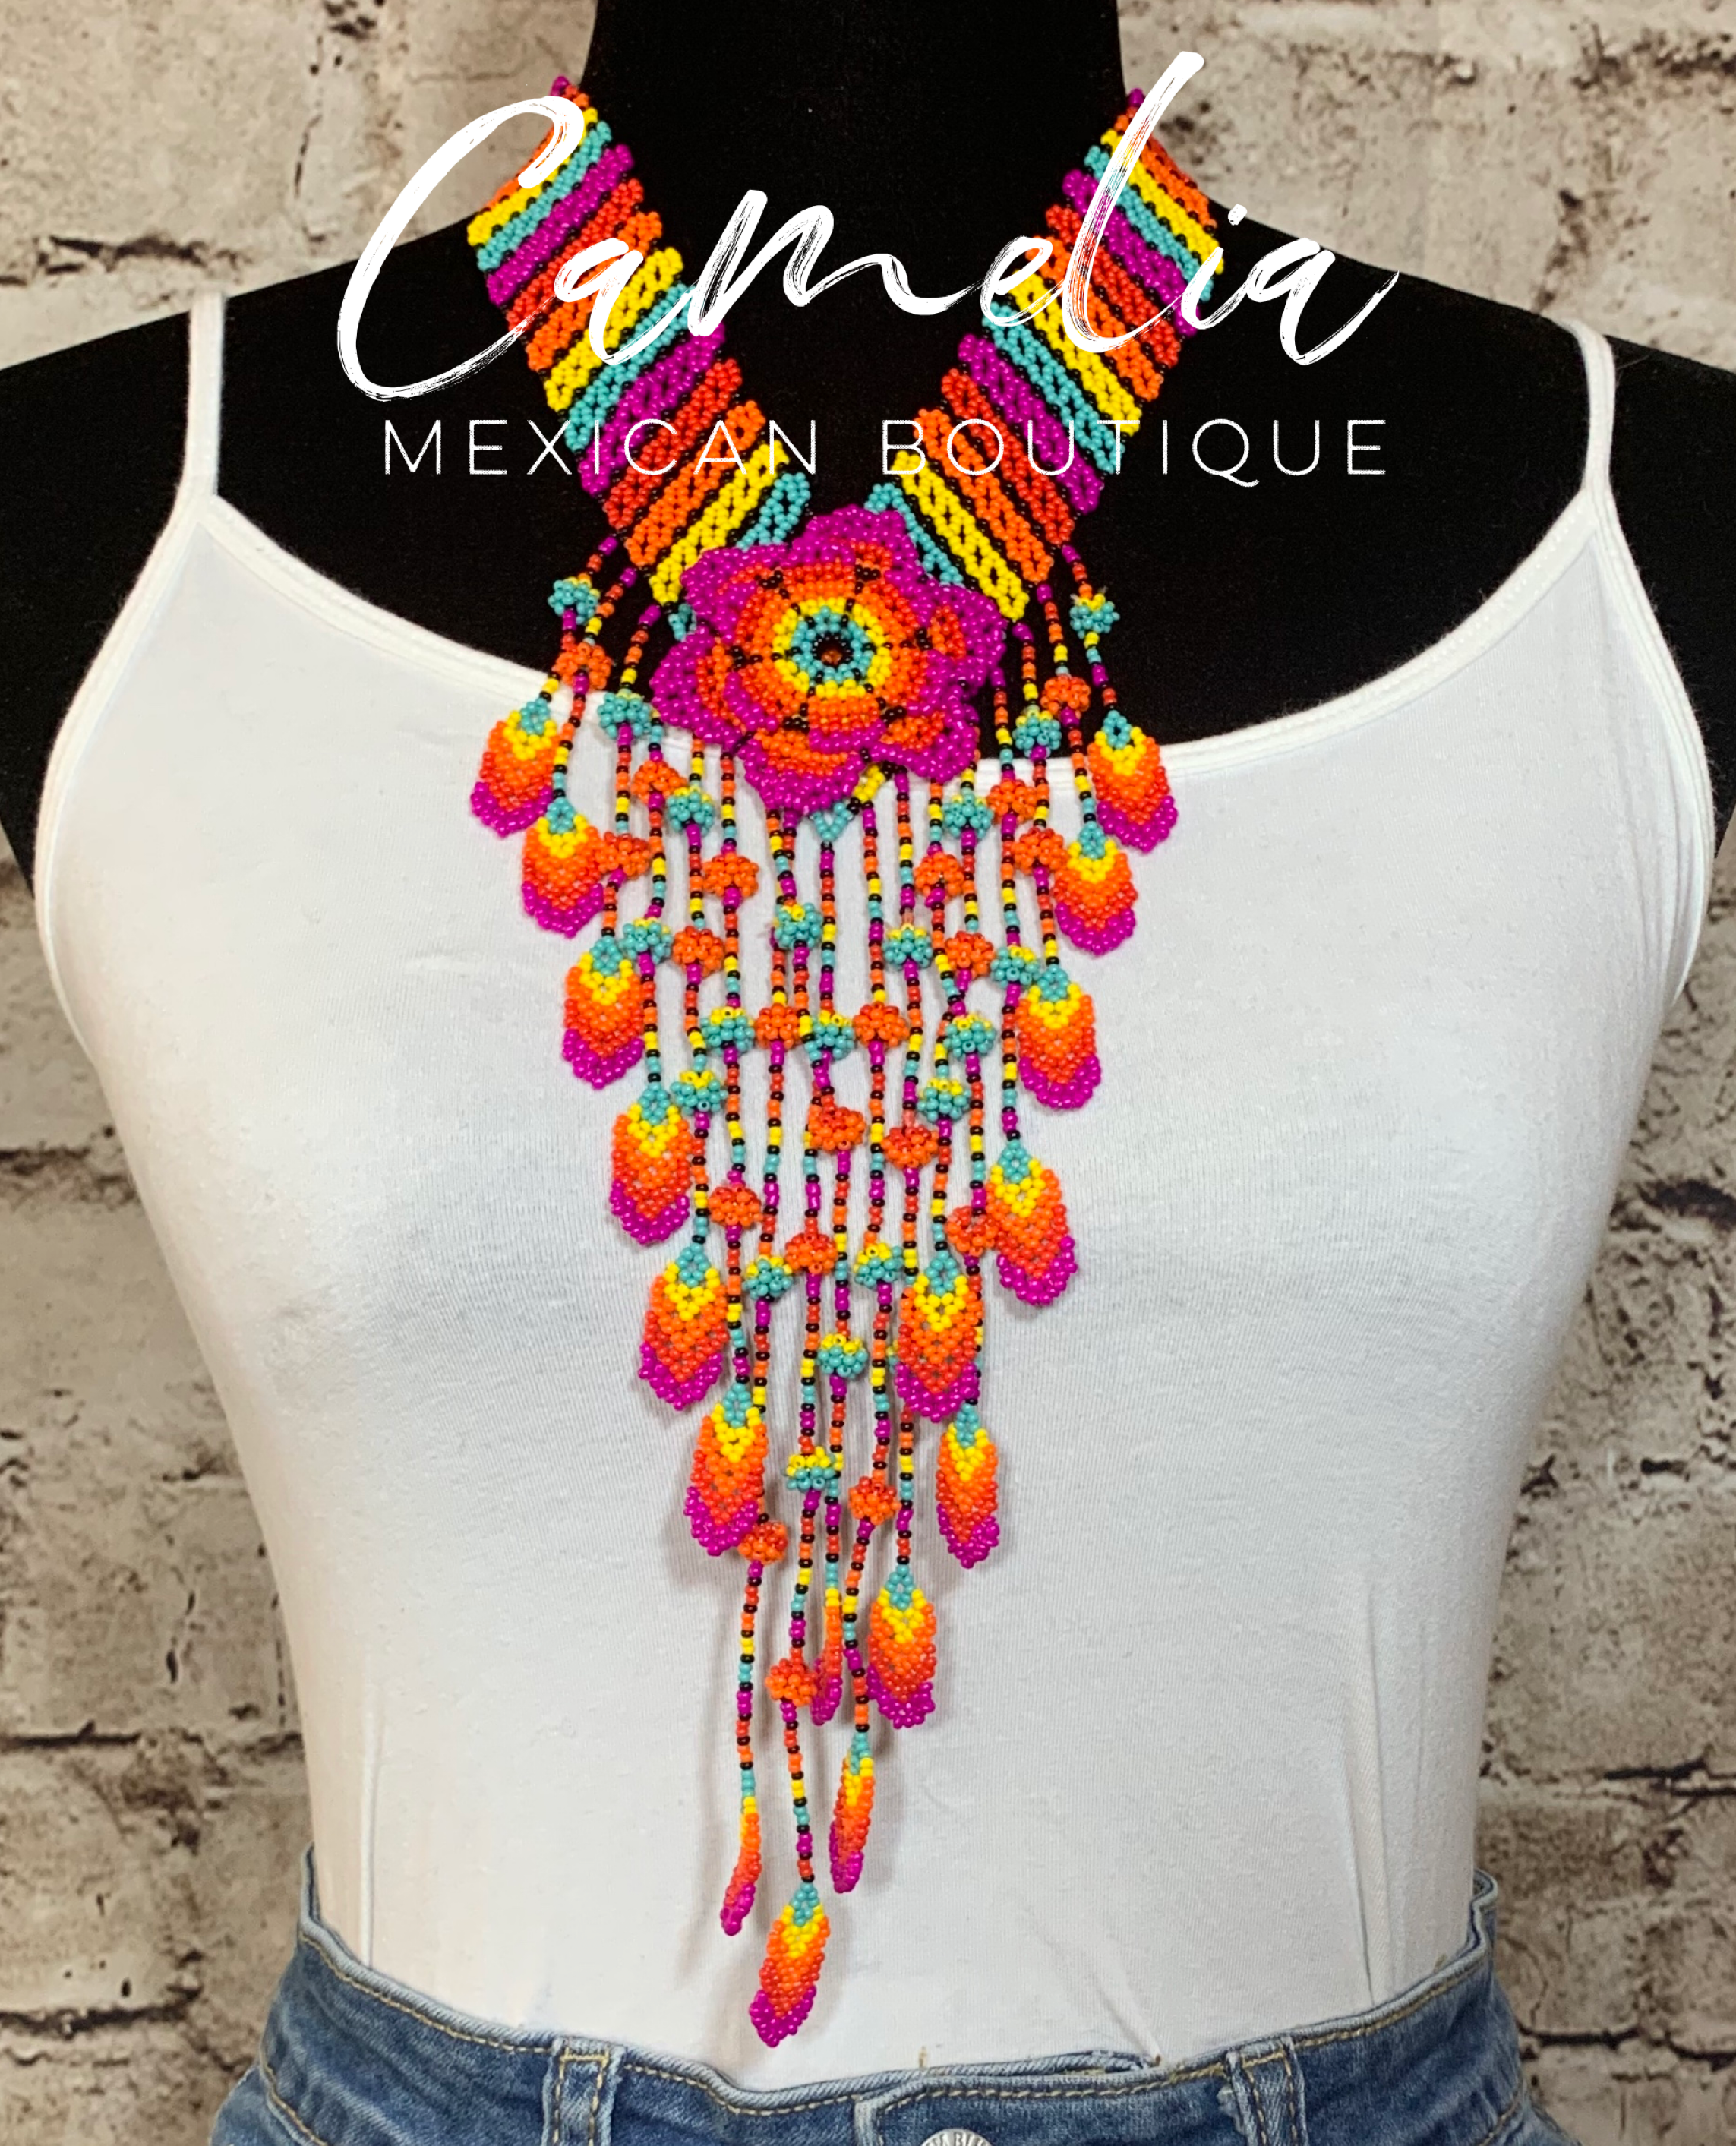 Mexican Jewelry. Beaded Mexican Necklace. Seed Beads Necklace. Huichol  Jewelry. Colorful Floral Jewelry. Huichol Necklace Handmade Jewelry. - Etsy